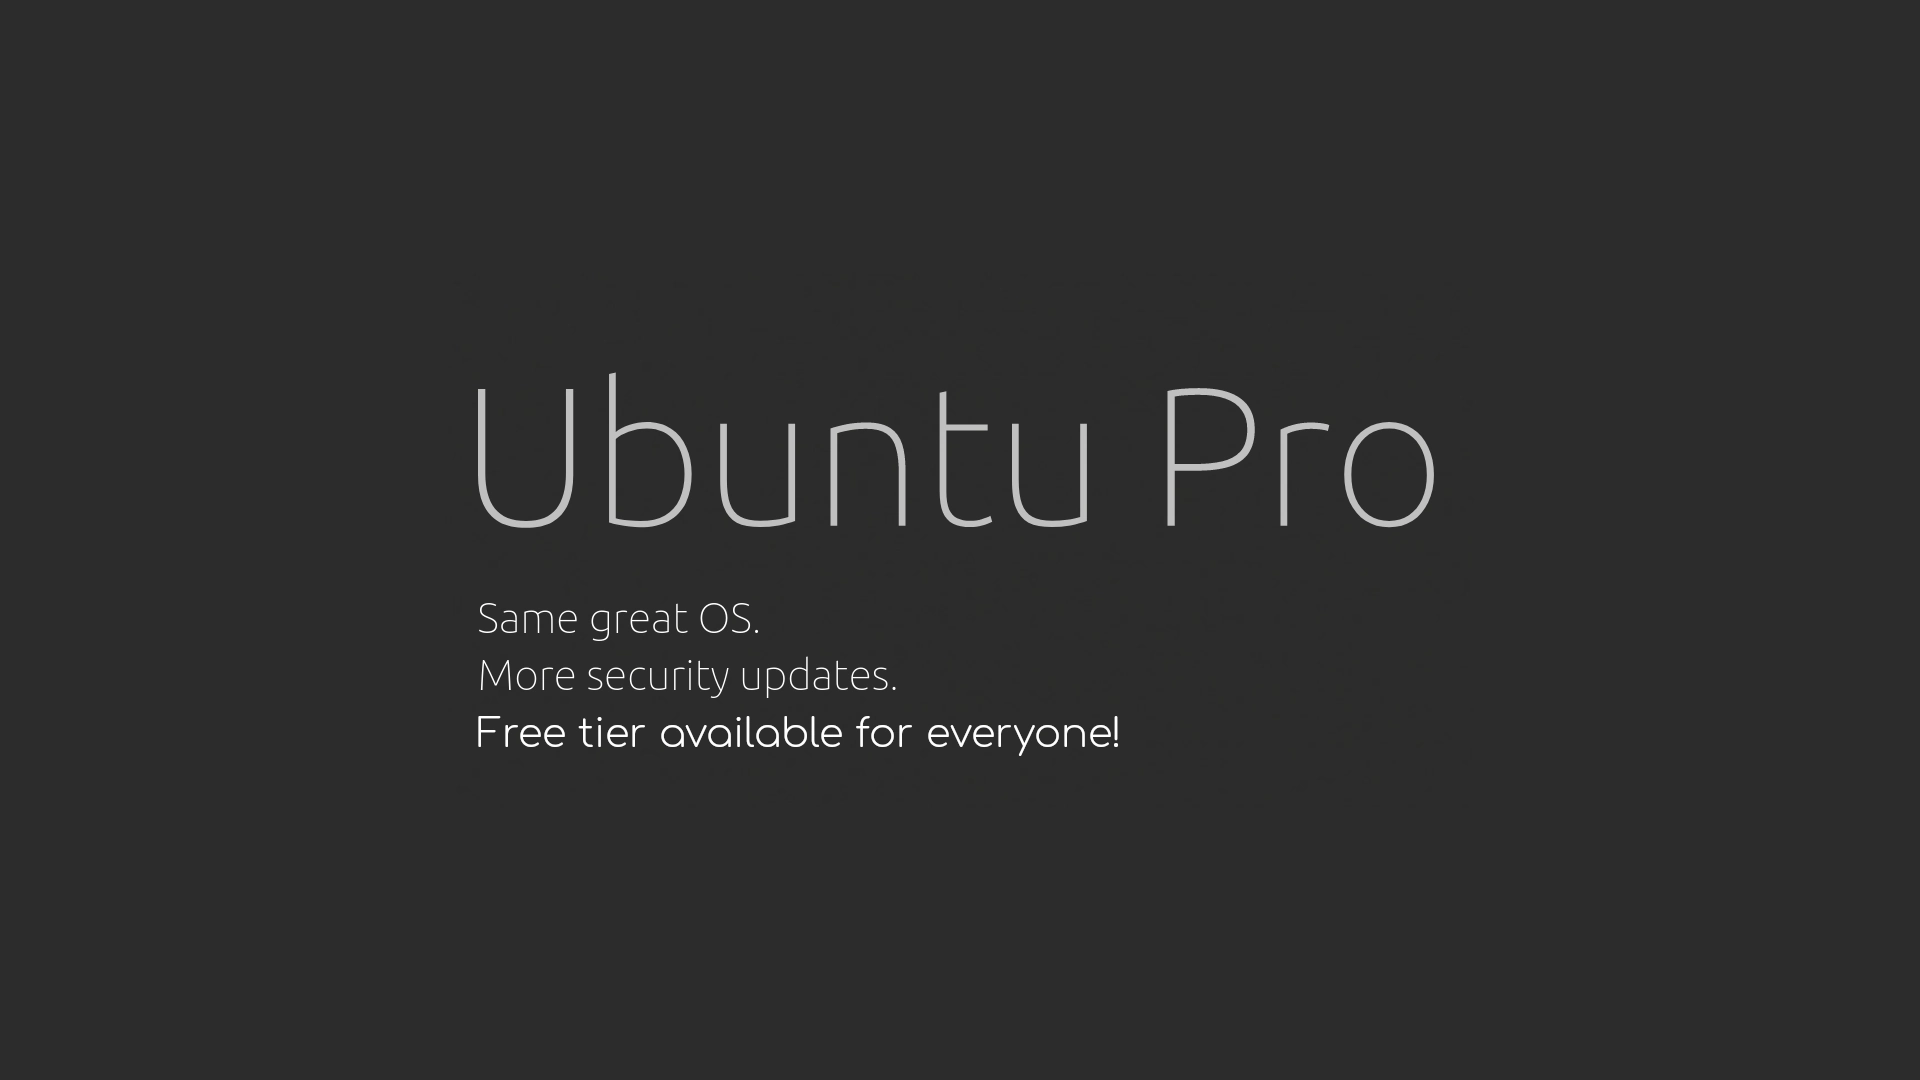 Canonical Announces General Availability of Ubuntu Pro, Free for Up to 5 PCs